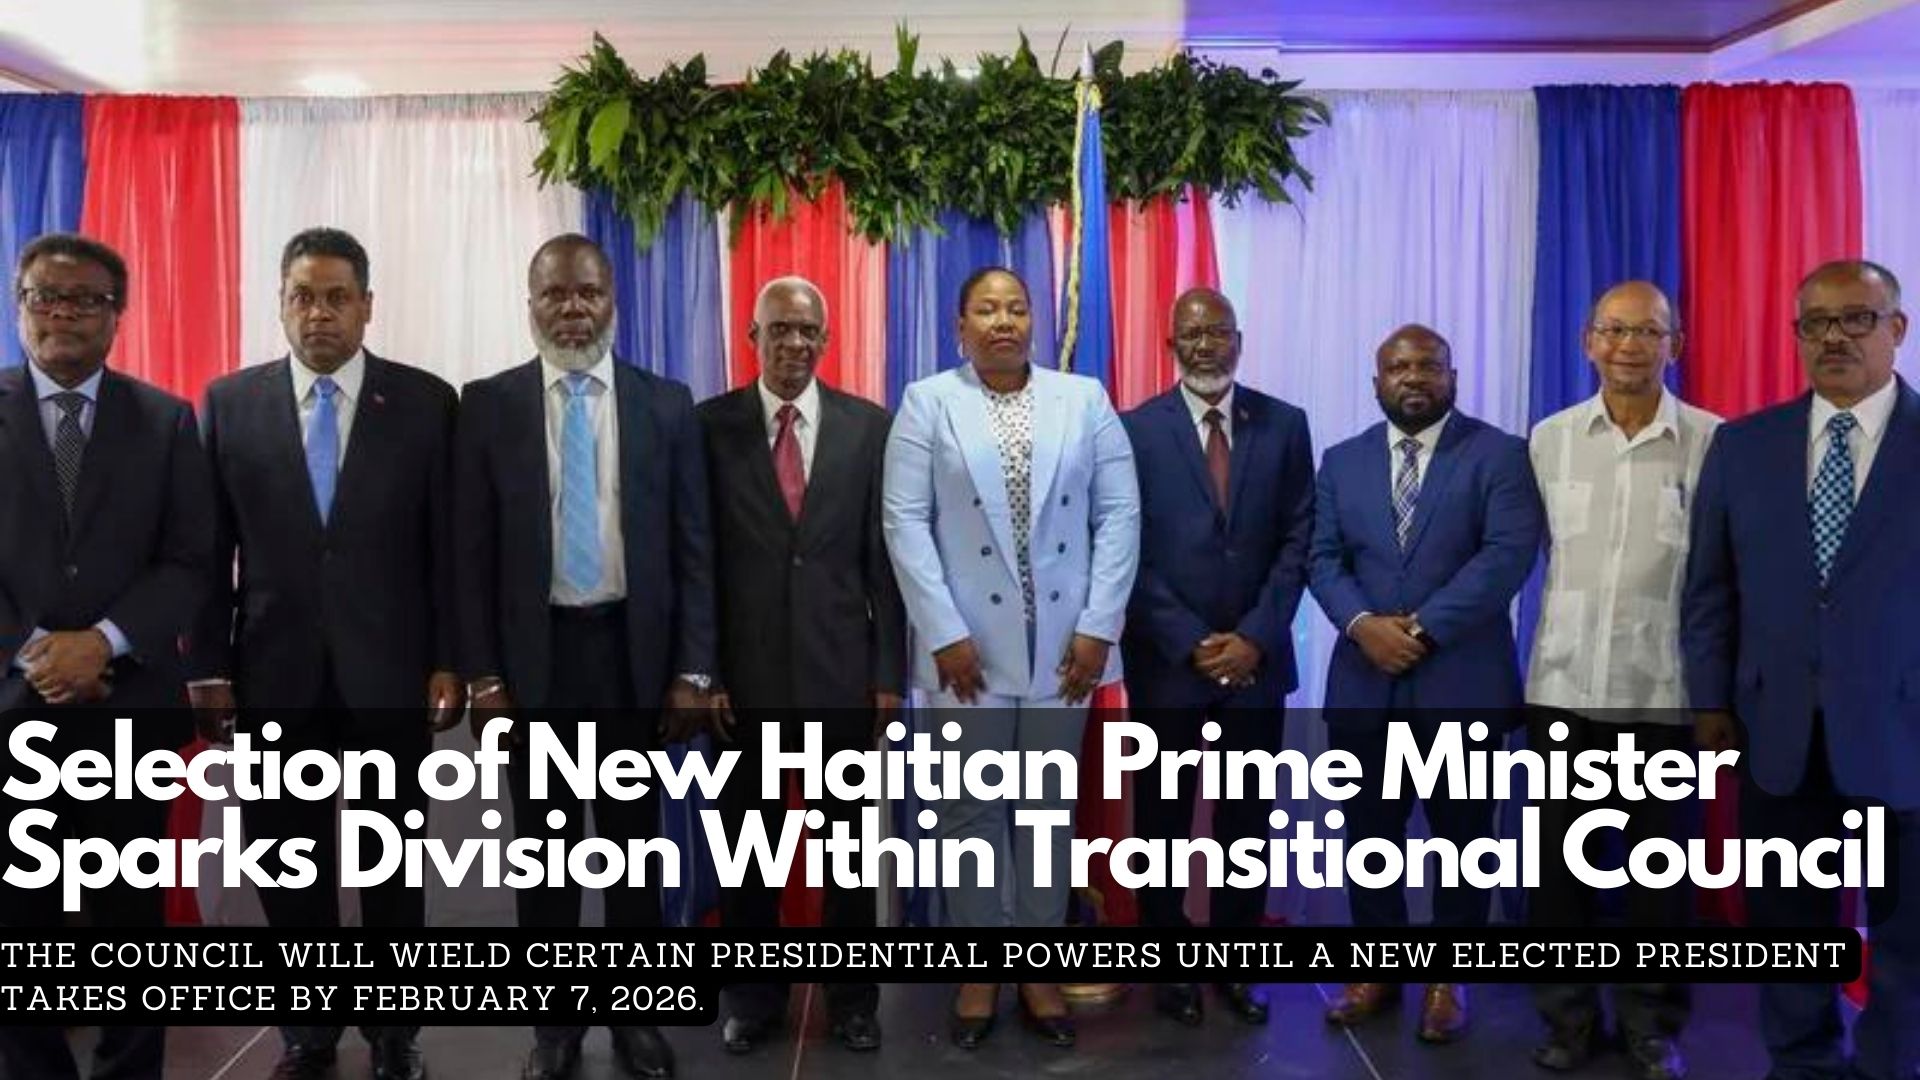 Selection of New Haitian Prime Minister Sparks Division Within Transitional Council